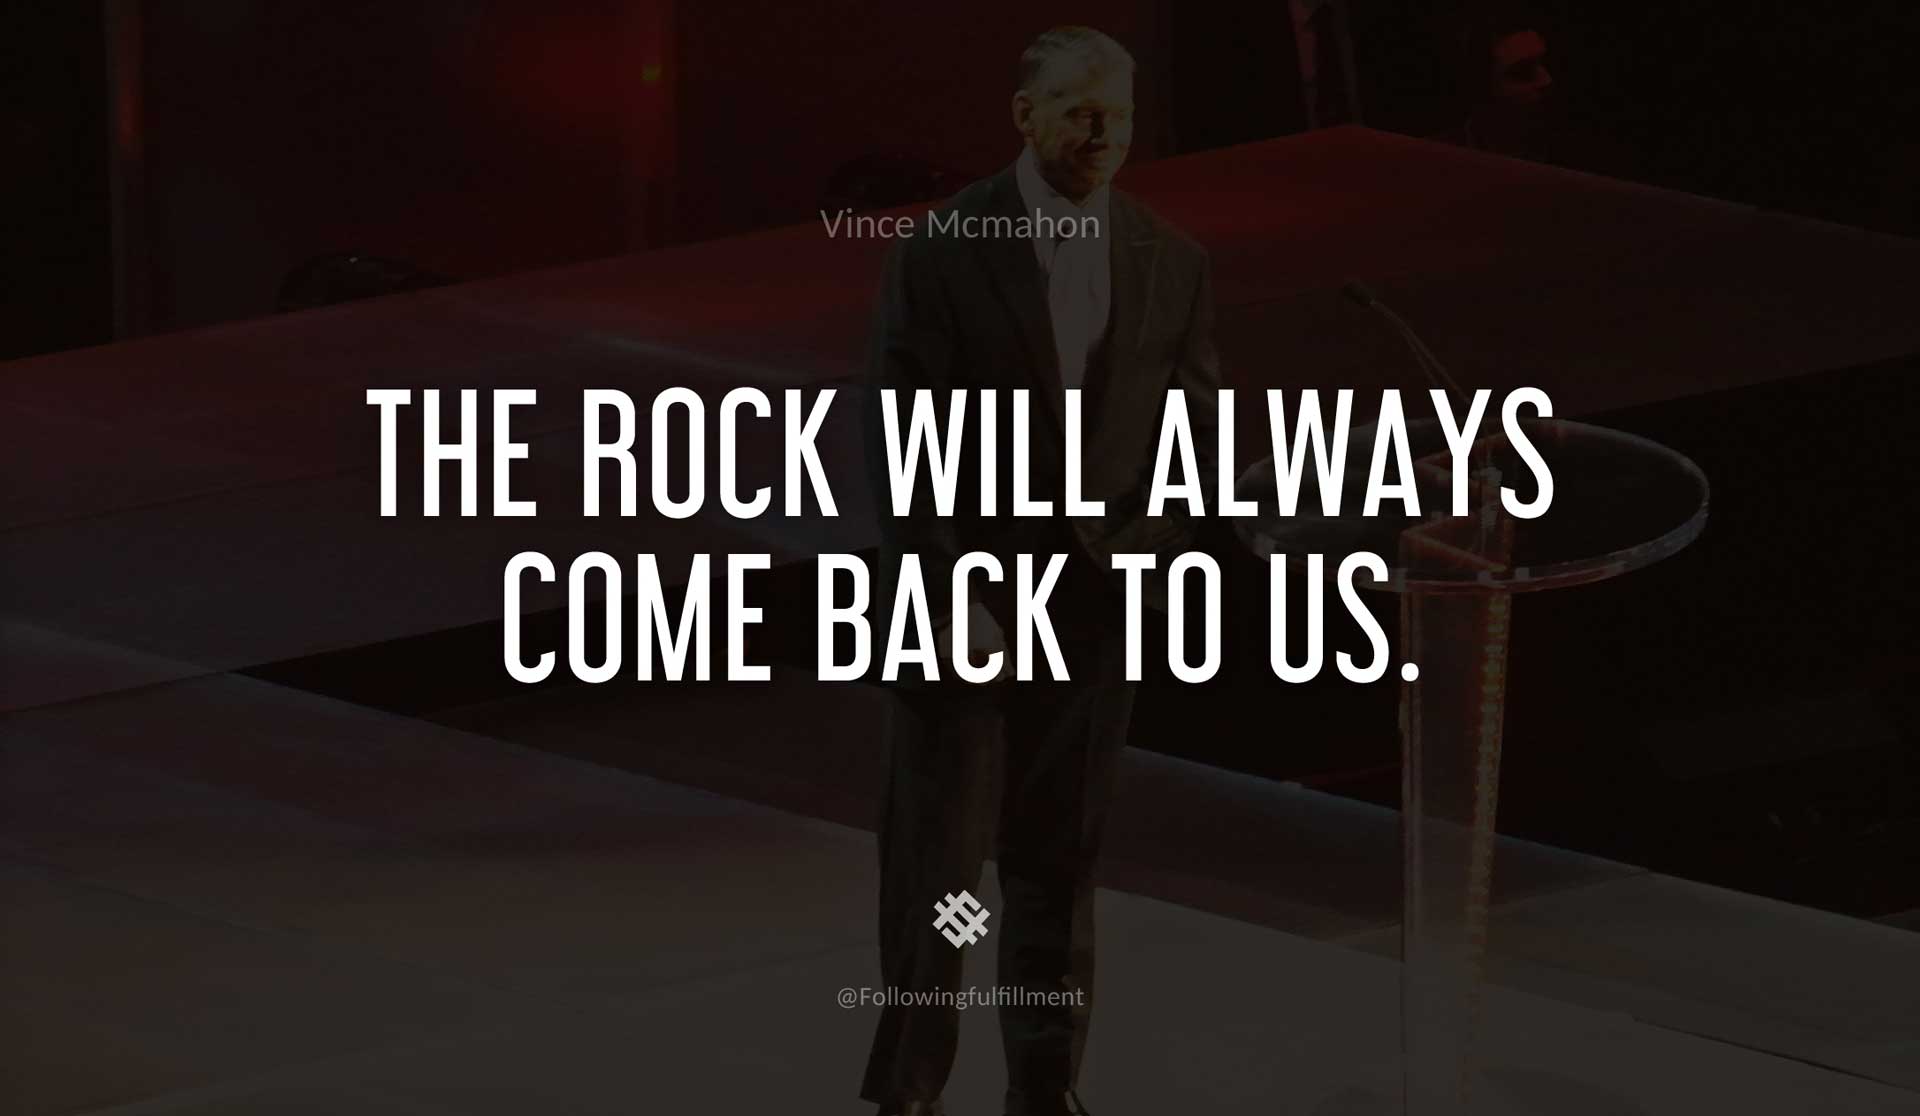 The-Rock-will-always-come-back-to-us.-VINCE-MCMAHON-Quote.jpg